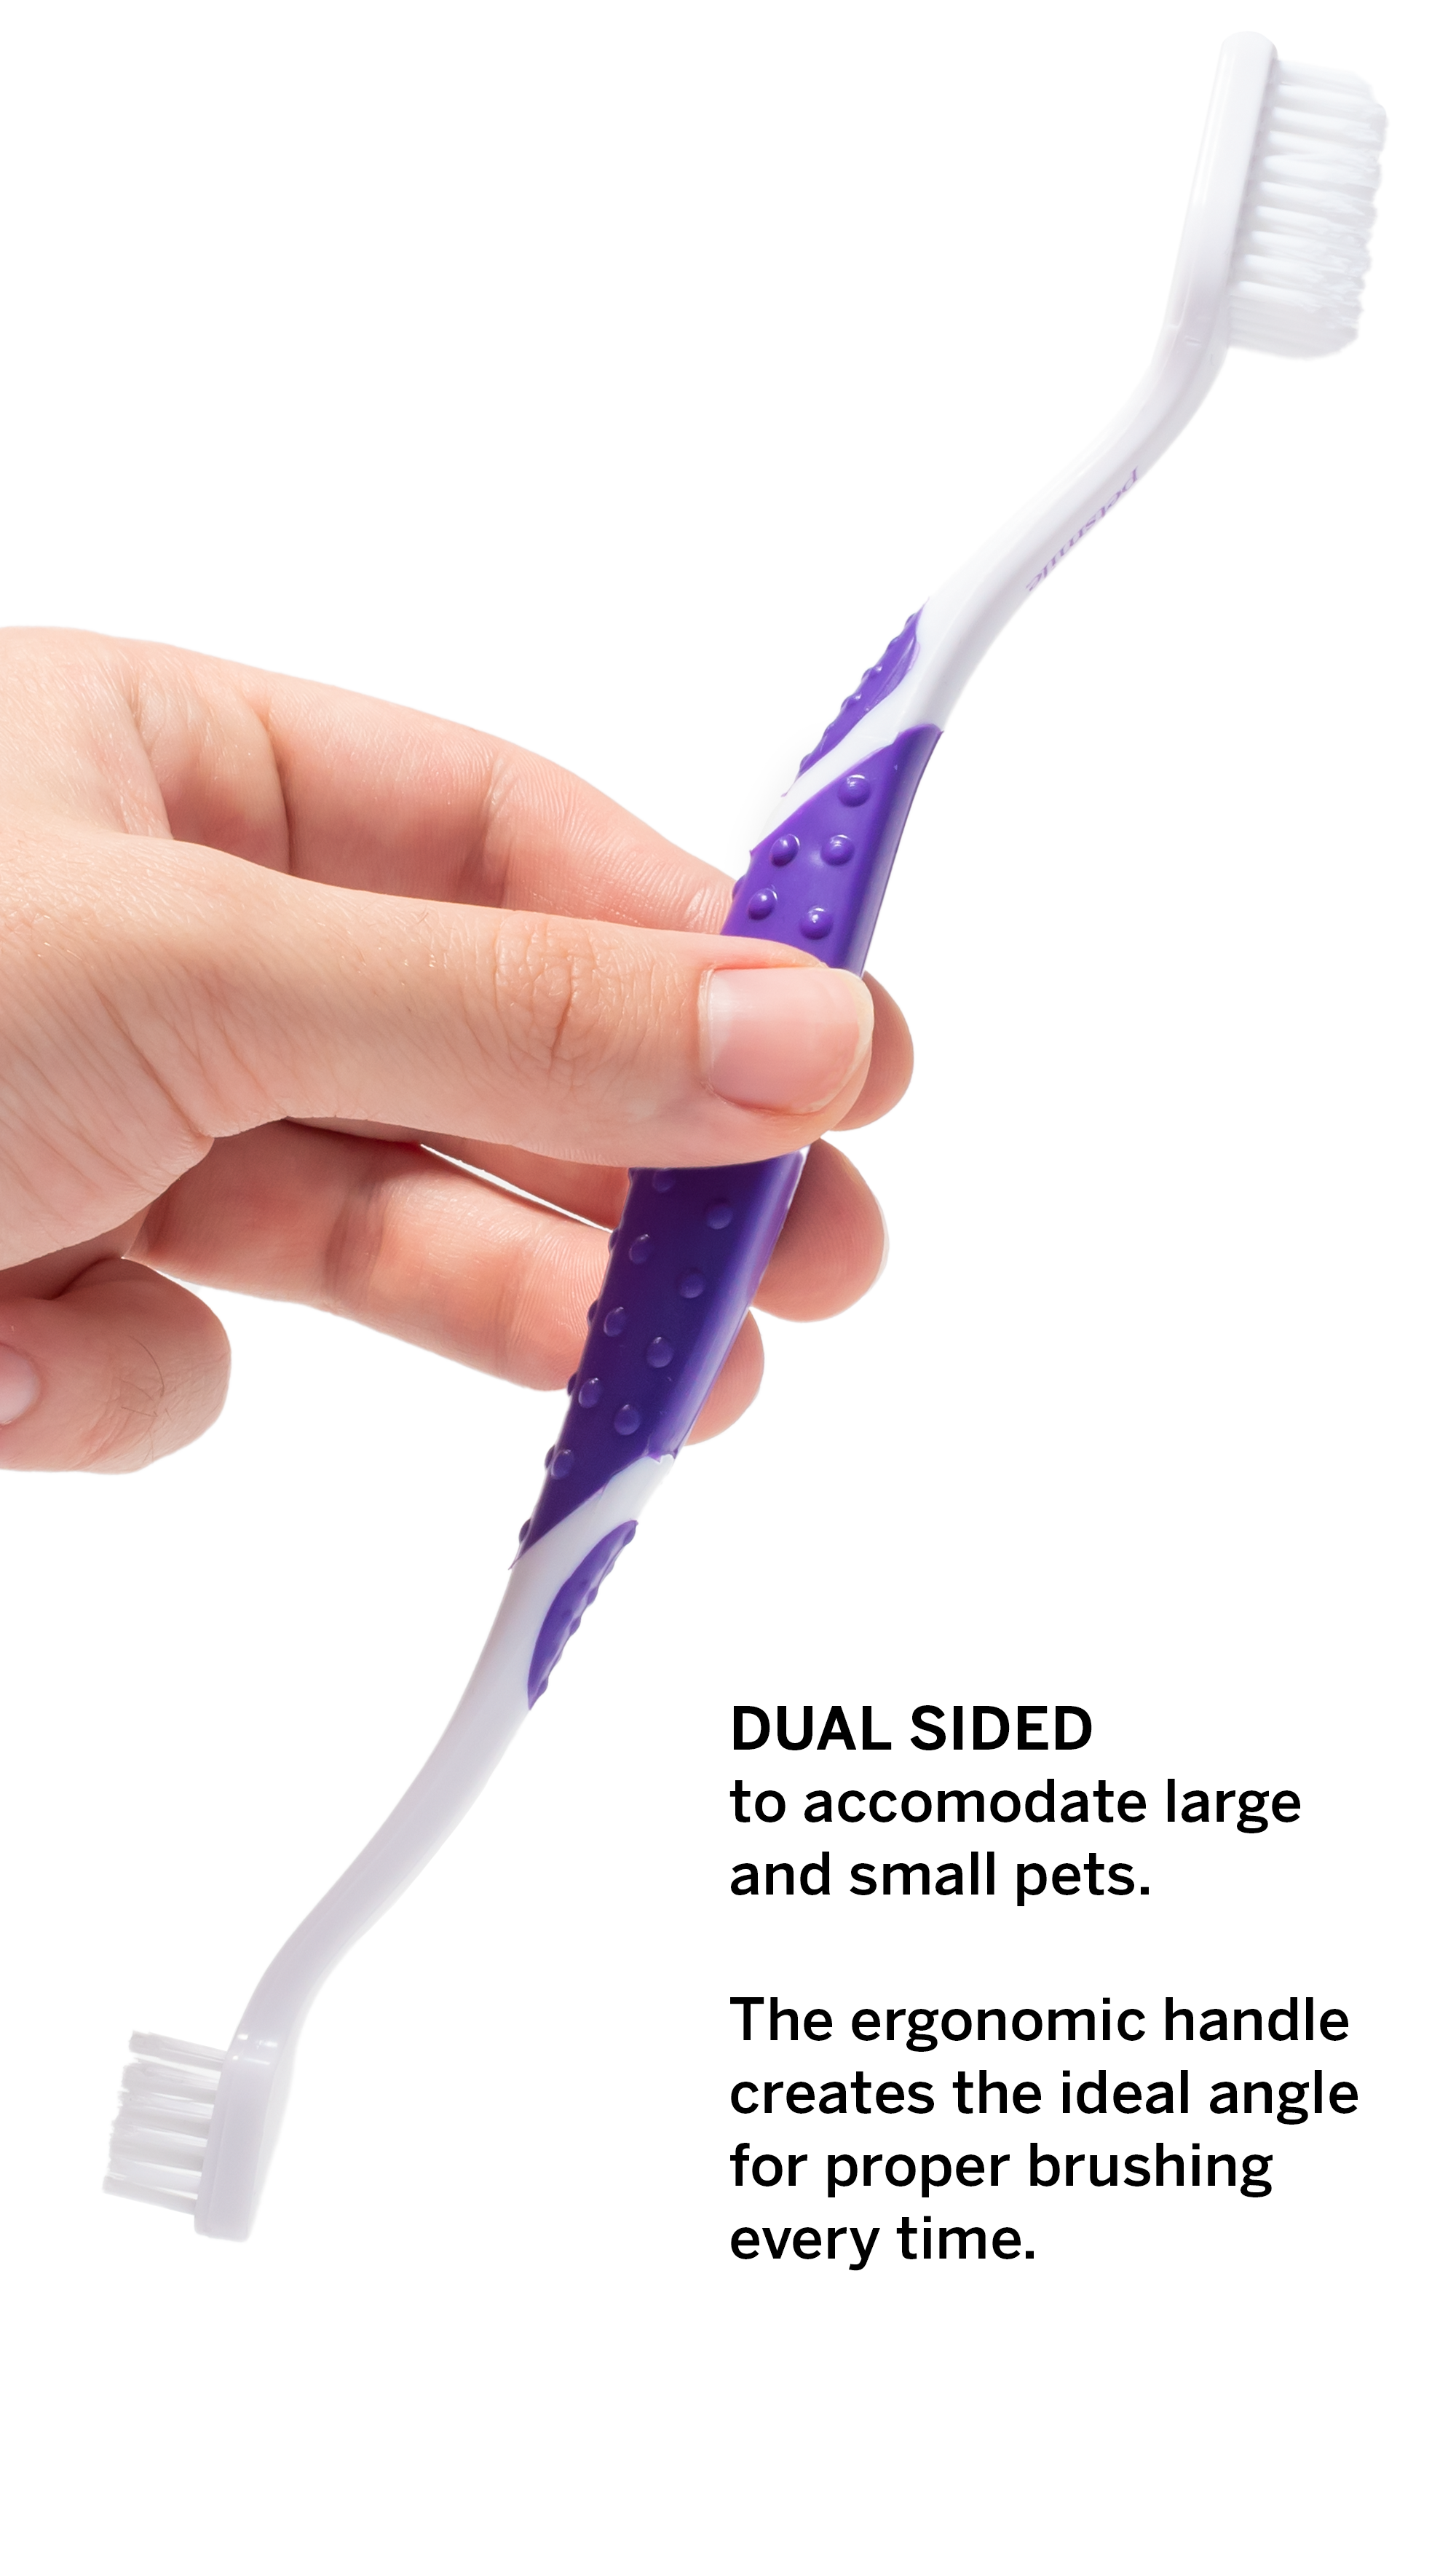 petsmile brush removes bacteria with ease , Dual-sided brush cleans teeth and gums , Purple toothbrush with 45-degree angle , Large cat toothpaste with London Broil flavor , Purple toothbrush that makes teeth cleaner